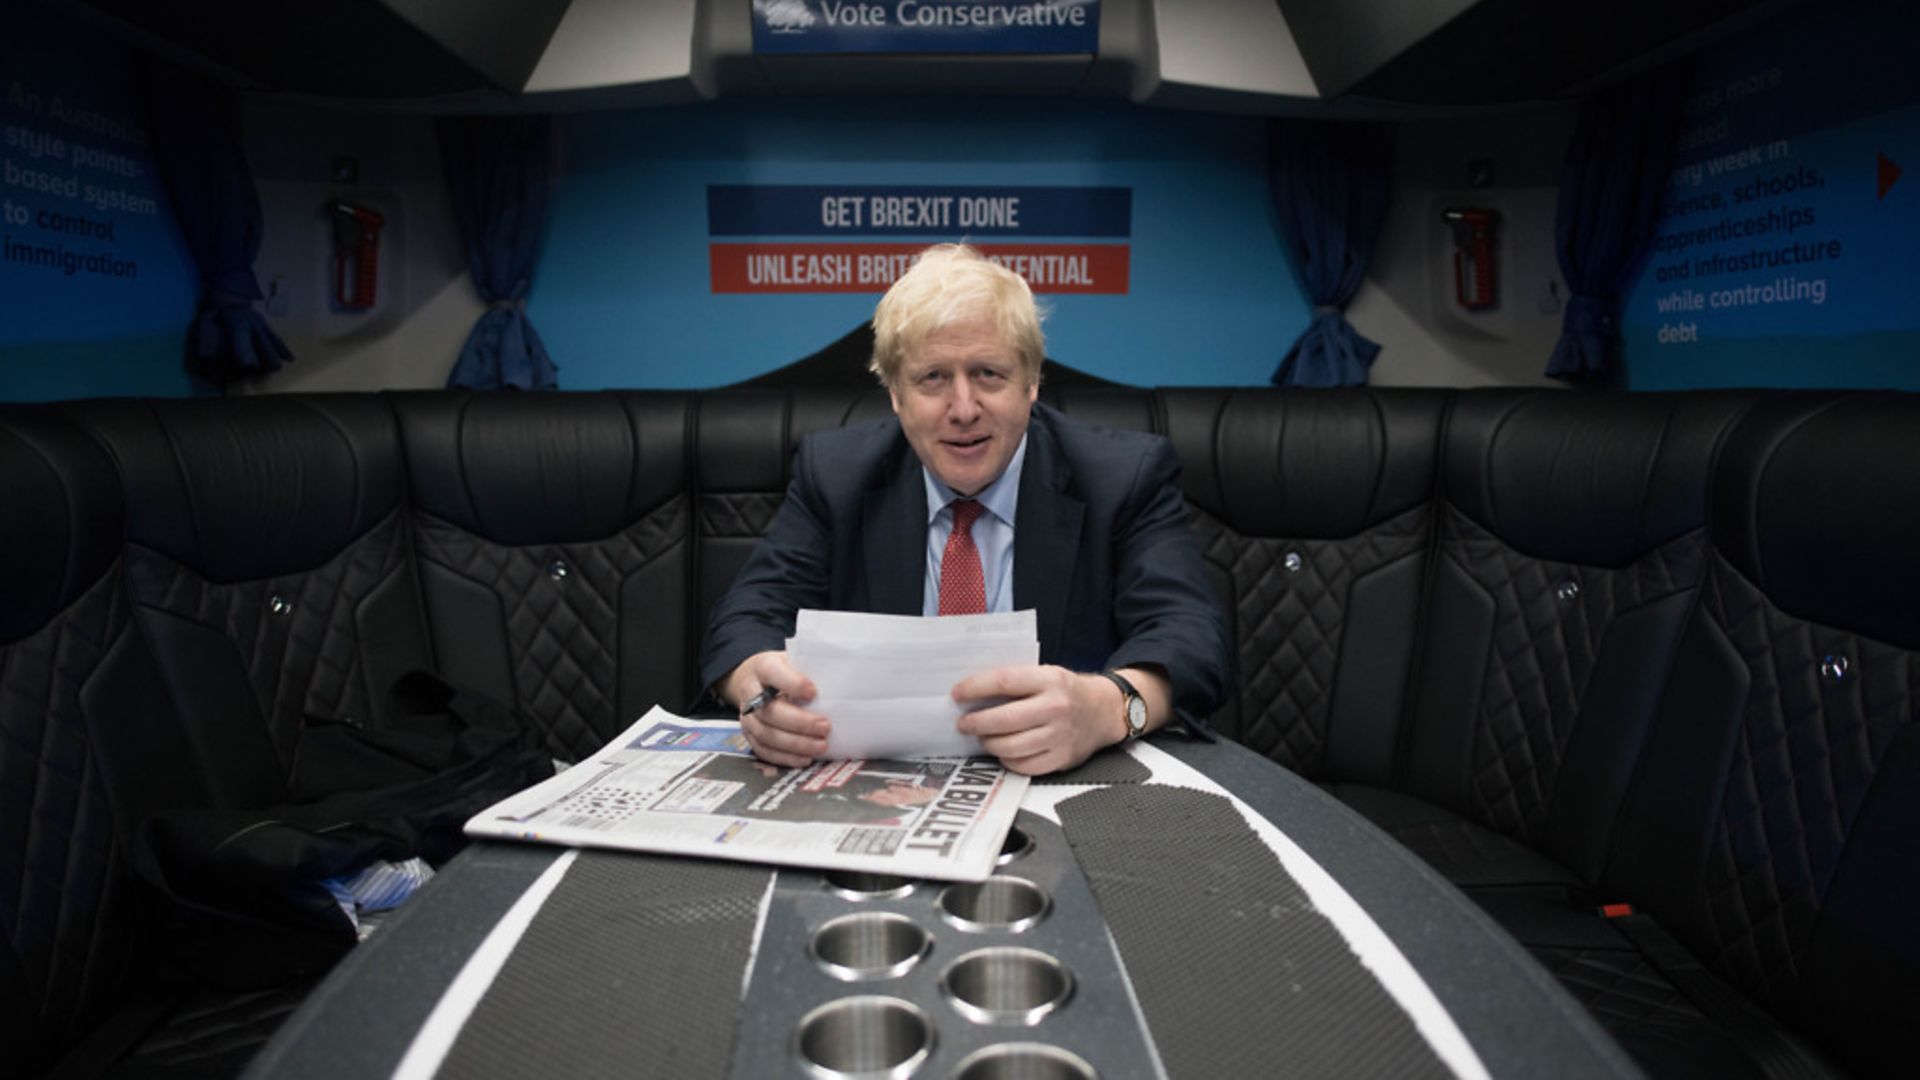 Prime minister Boris Johnson on the campaign trail - Credit: PA Wire/PA Images